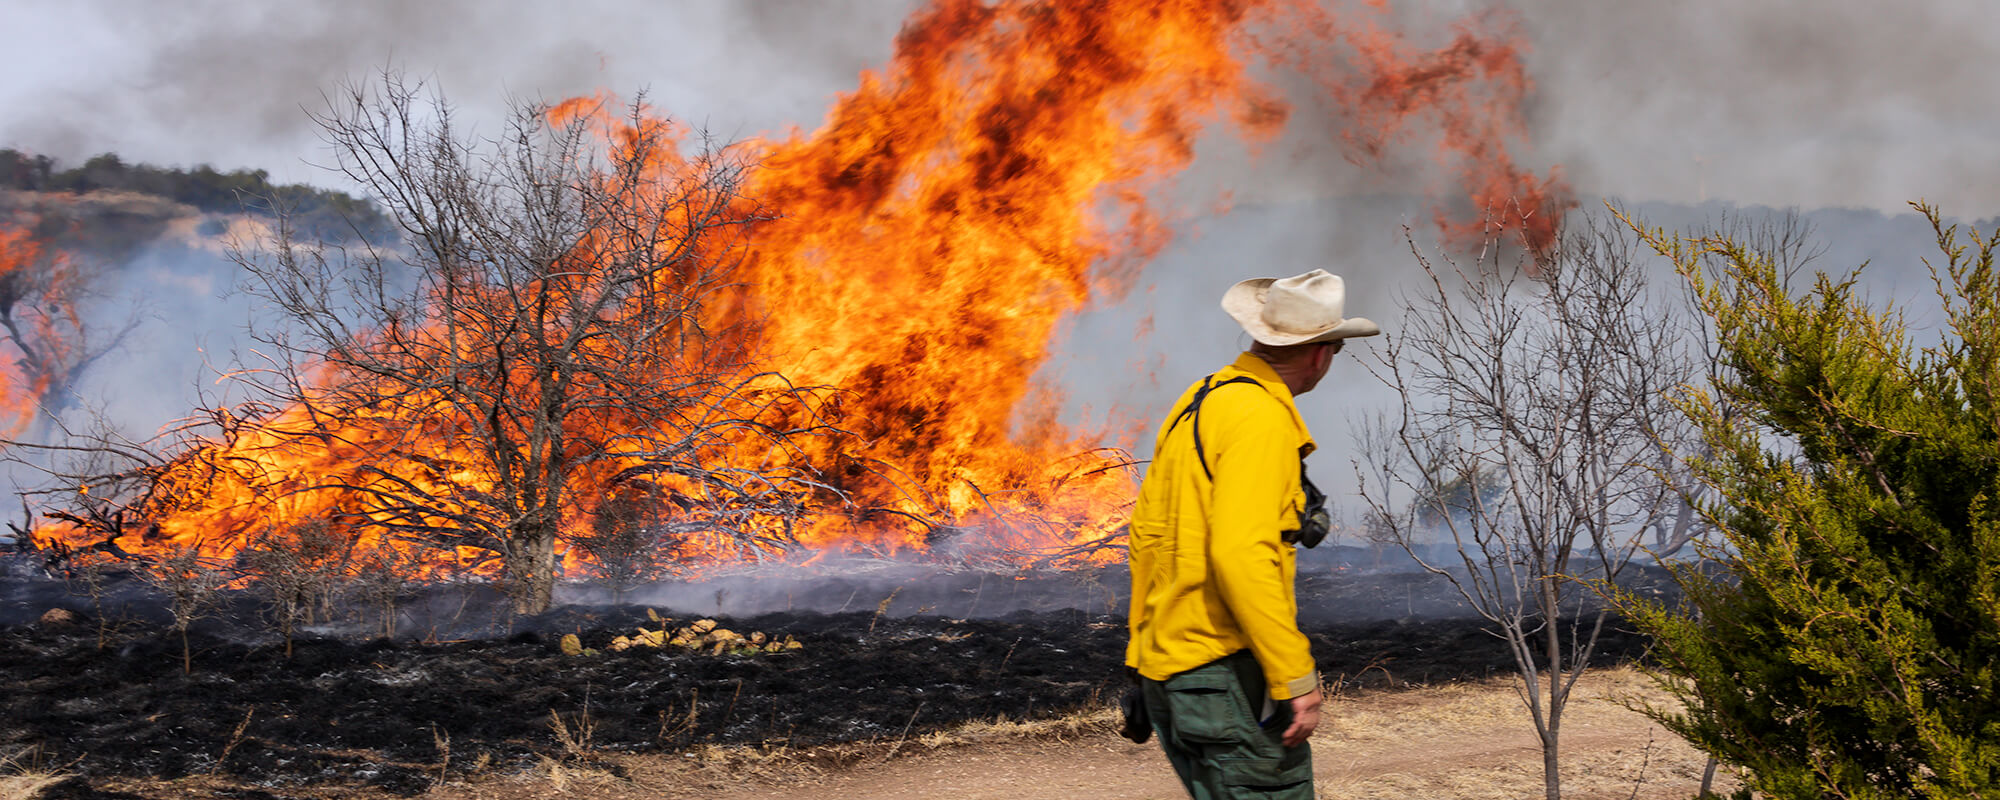 Rancher conducting a controlled burn